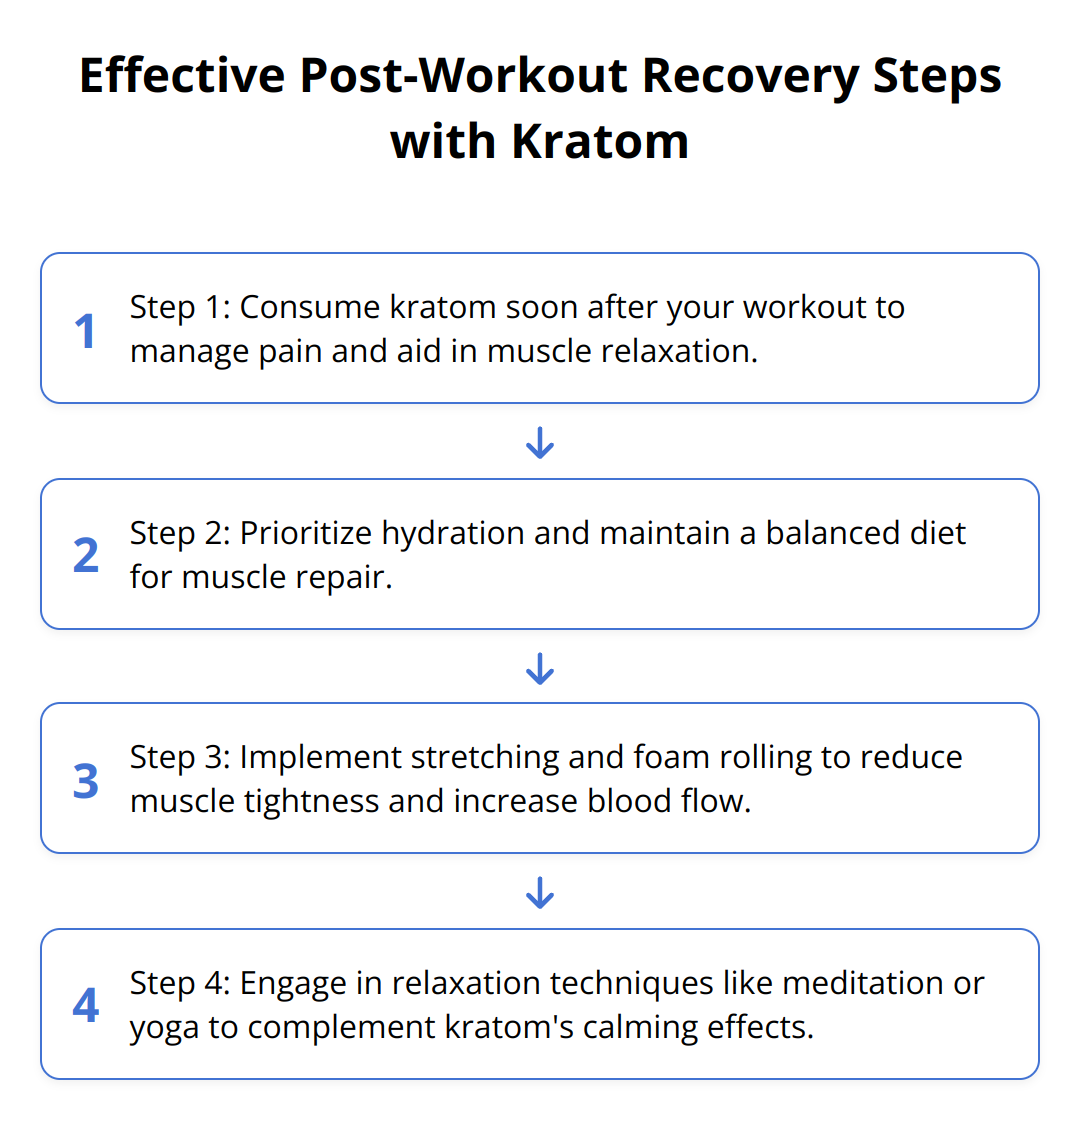 Flow Chart - Effective Post-Workout Recovery Steps with Kratom